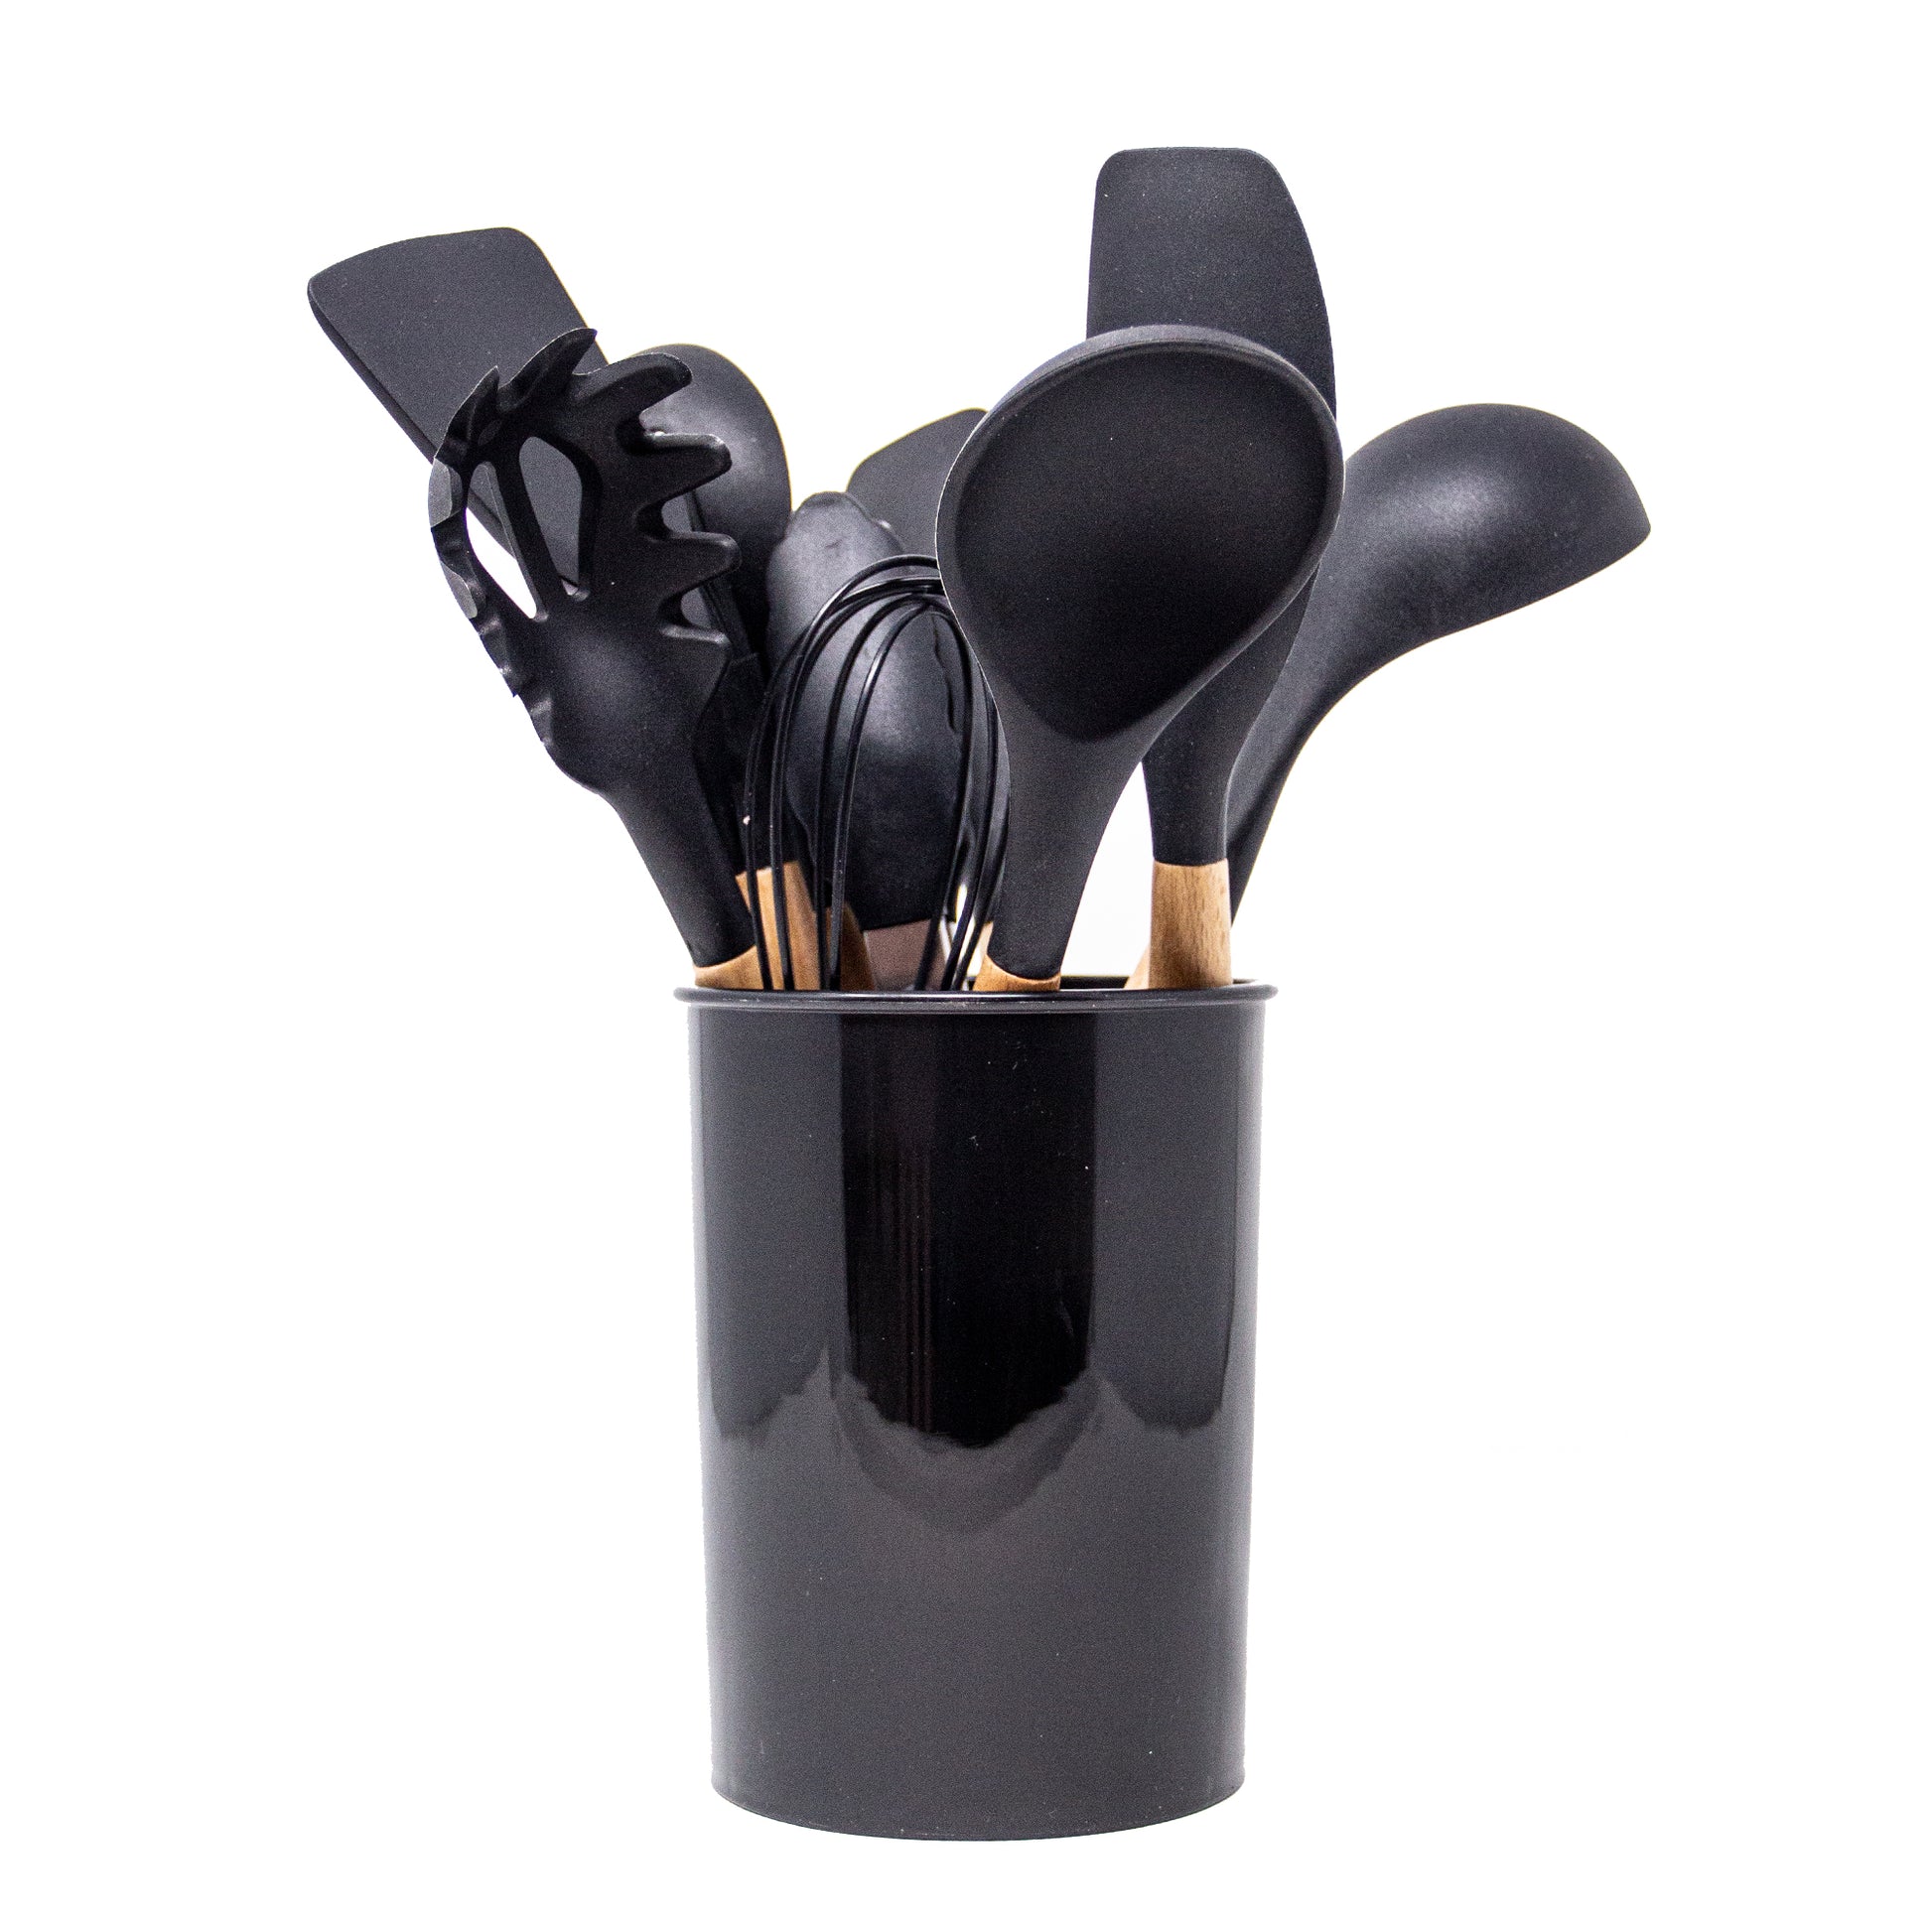 12 Pieces Set Silicon Utensils With Wooden Handles – Nature's Nest